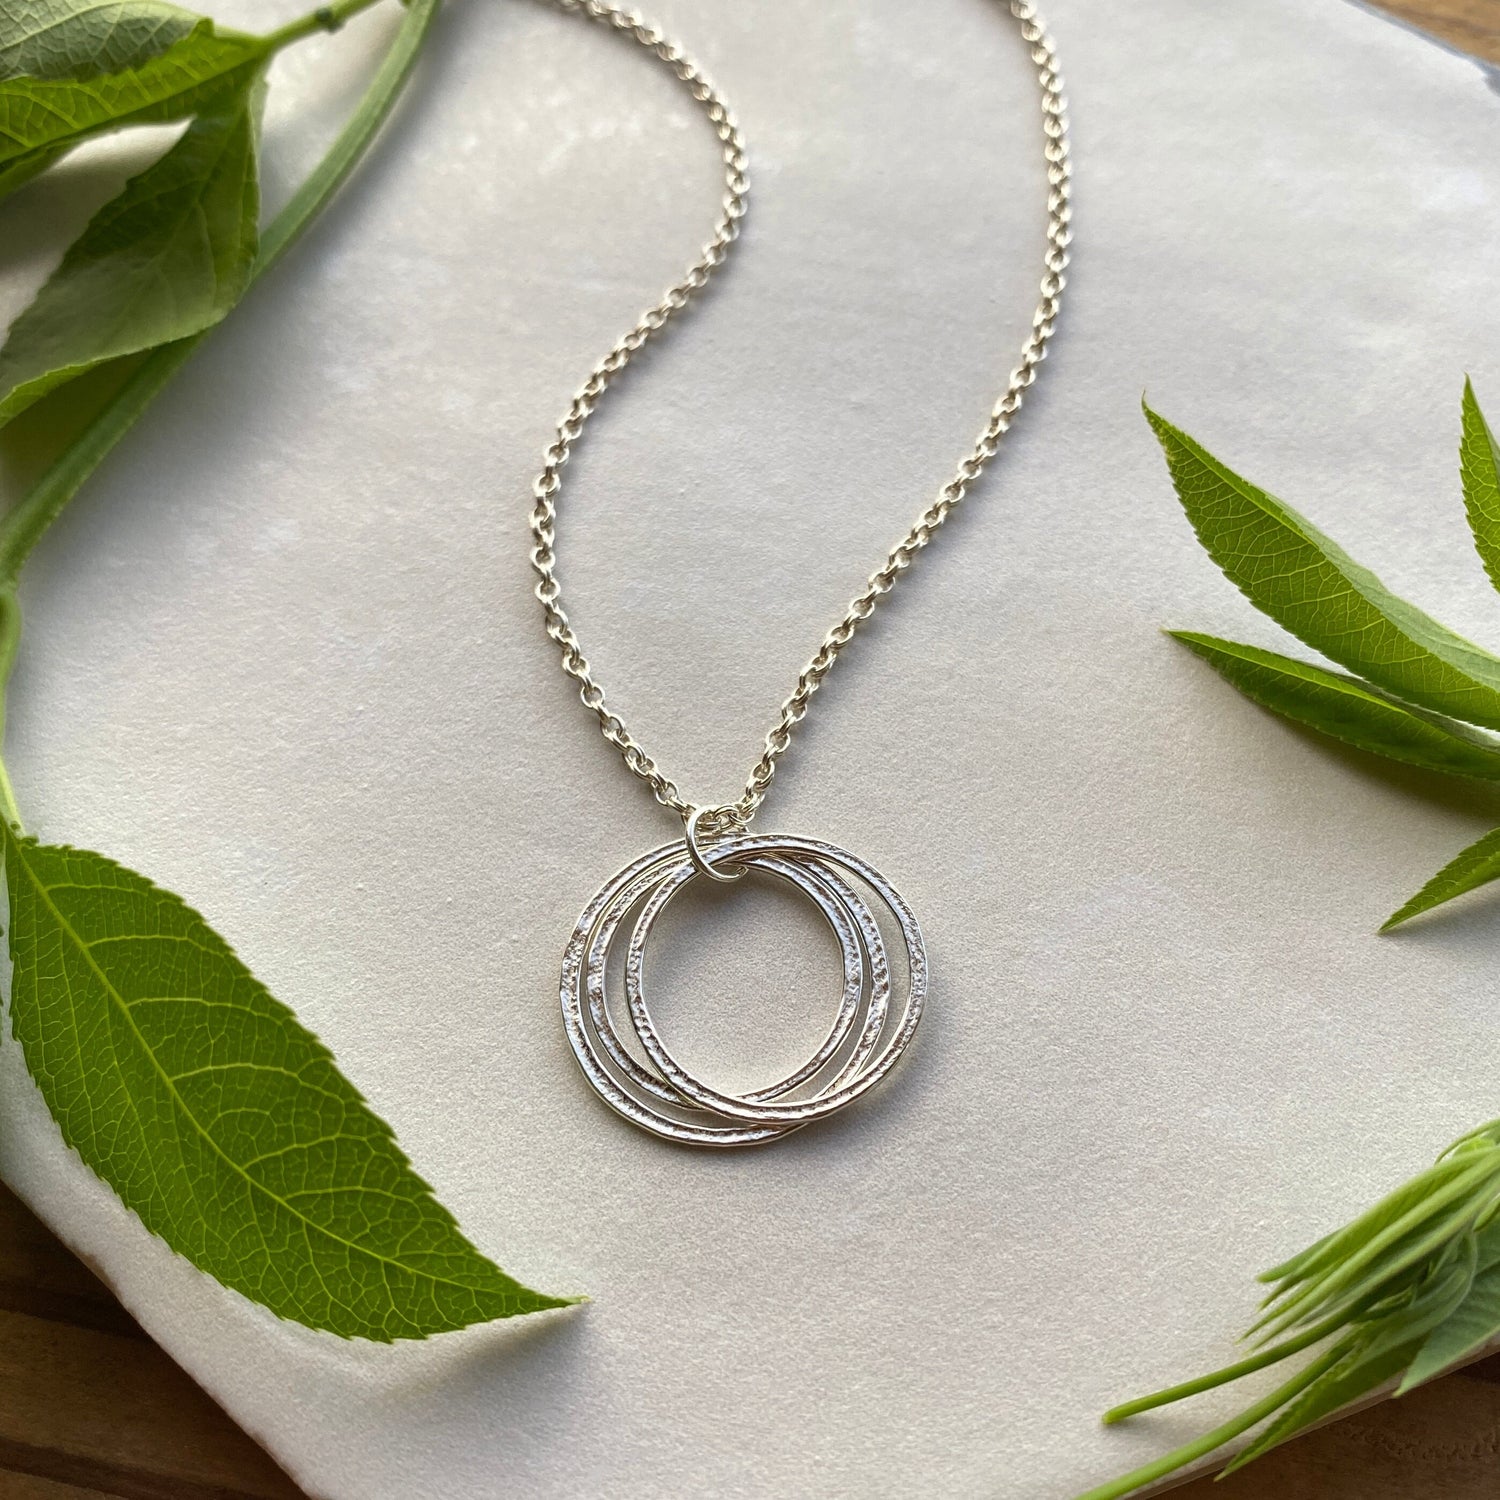 30th Milestone Birthday Necklace, Mid Size Sterling Silver 3 Rings for 3 Decades, Perfectly Imperfect Sparkly Circles Pendant